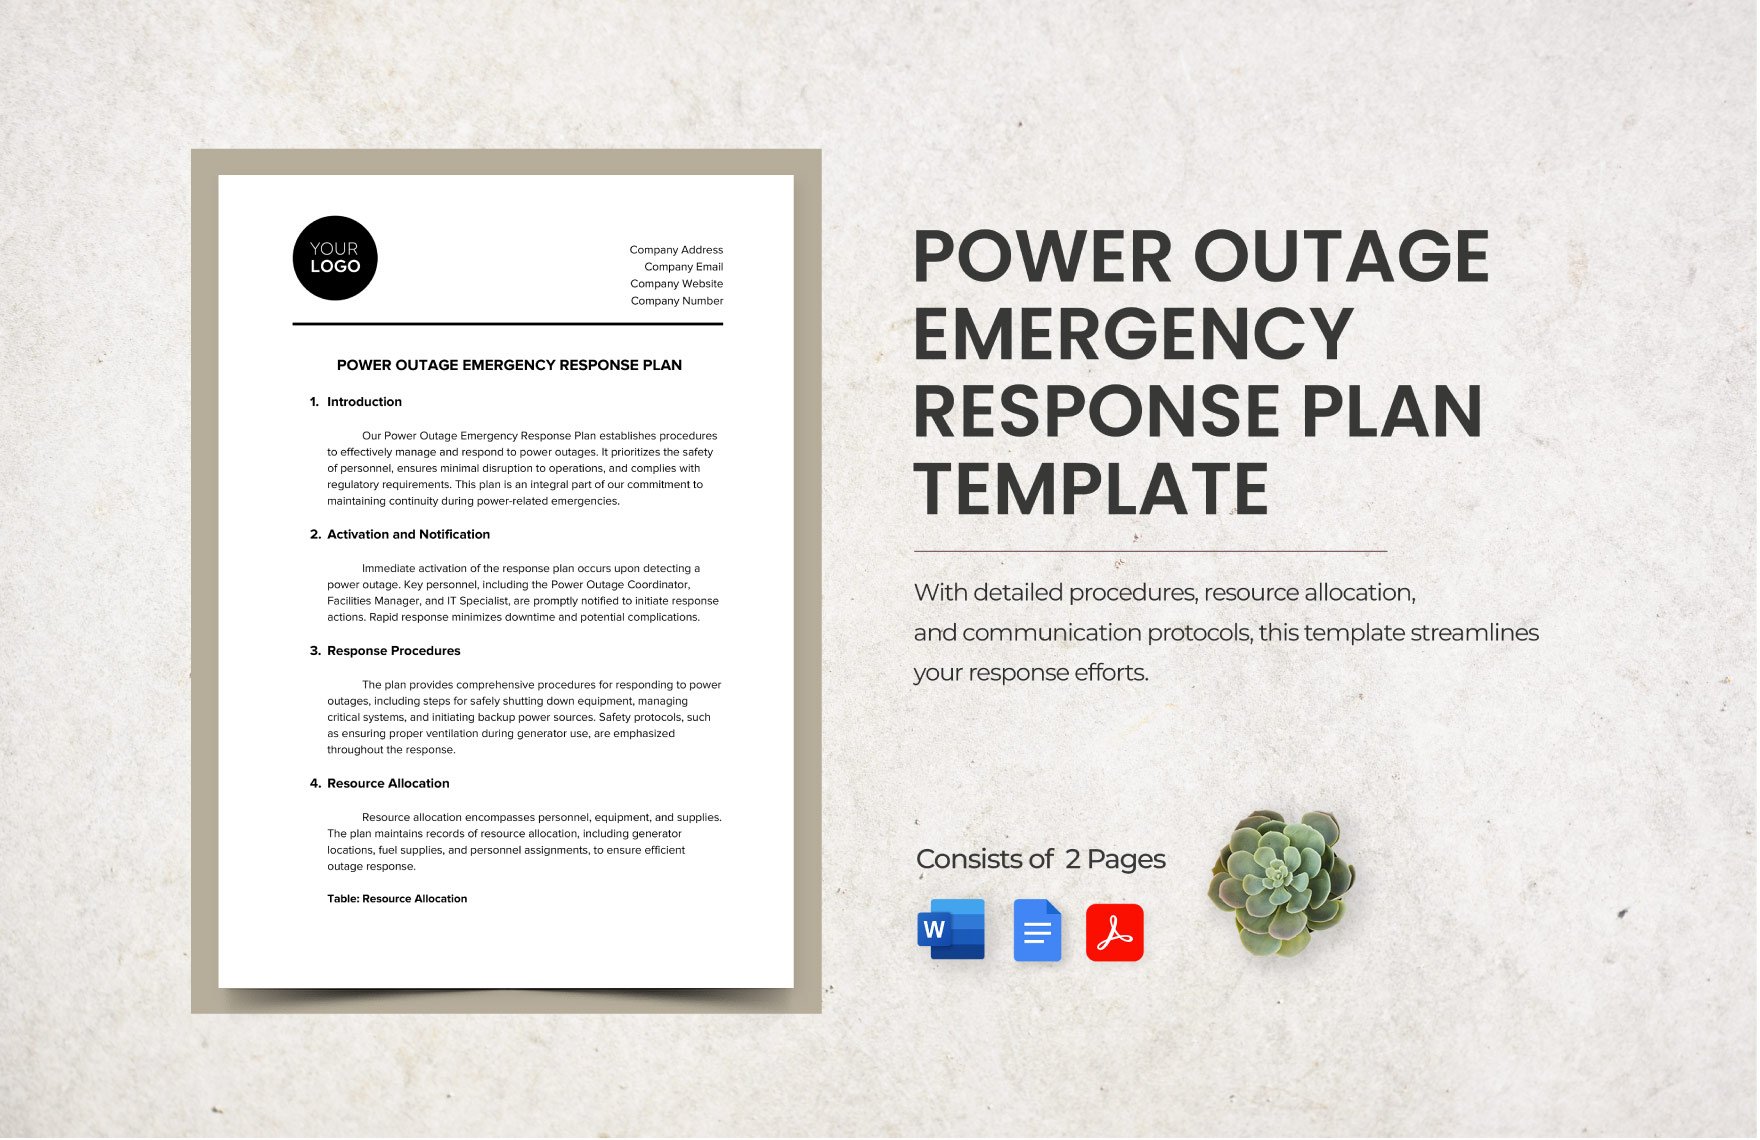 Power Outage Emergency Response Plan Template in Word, Google Docs, PDF